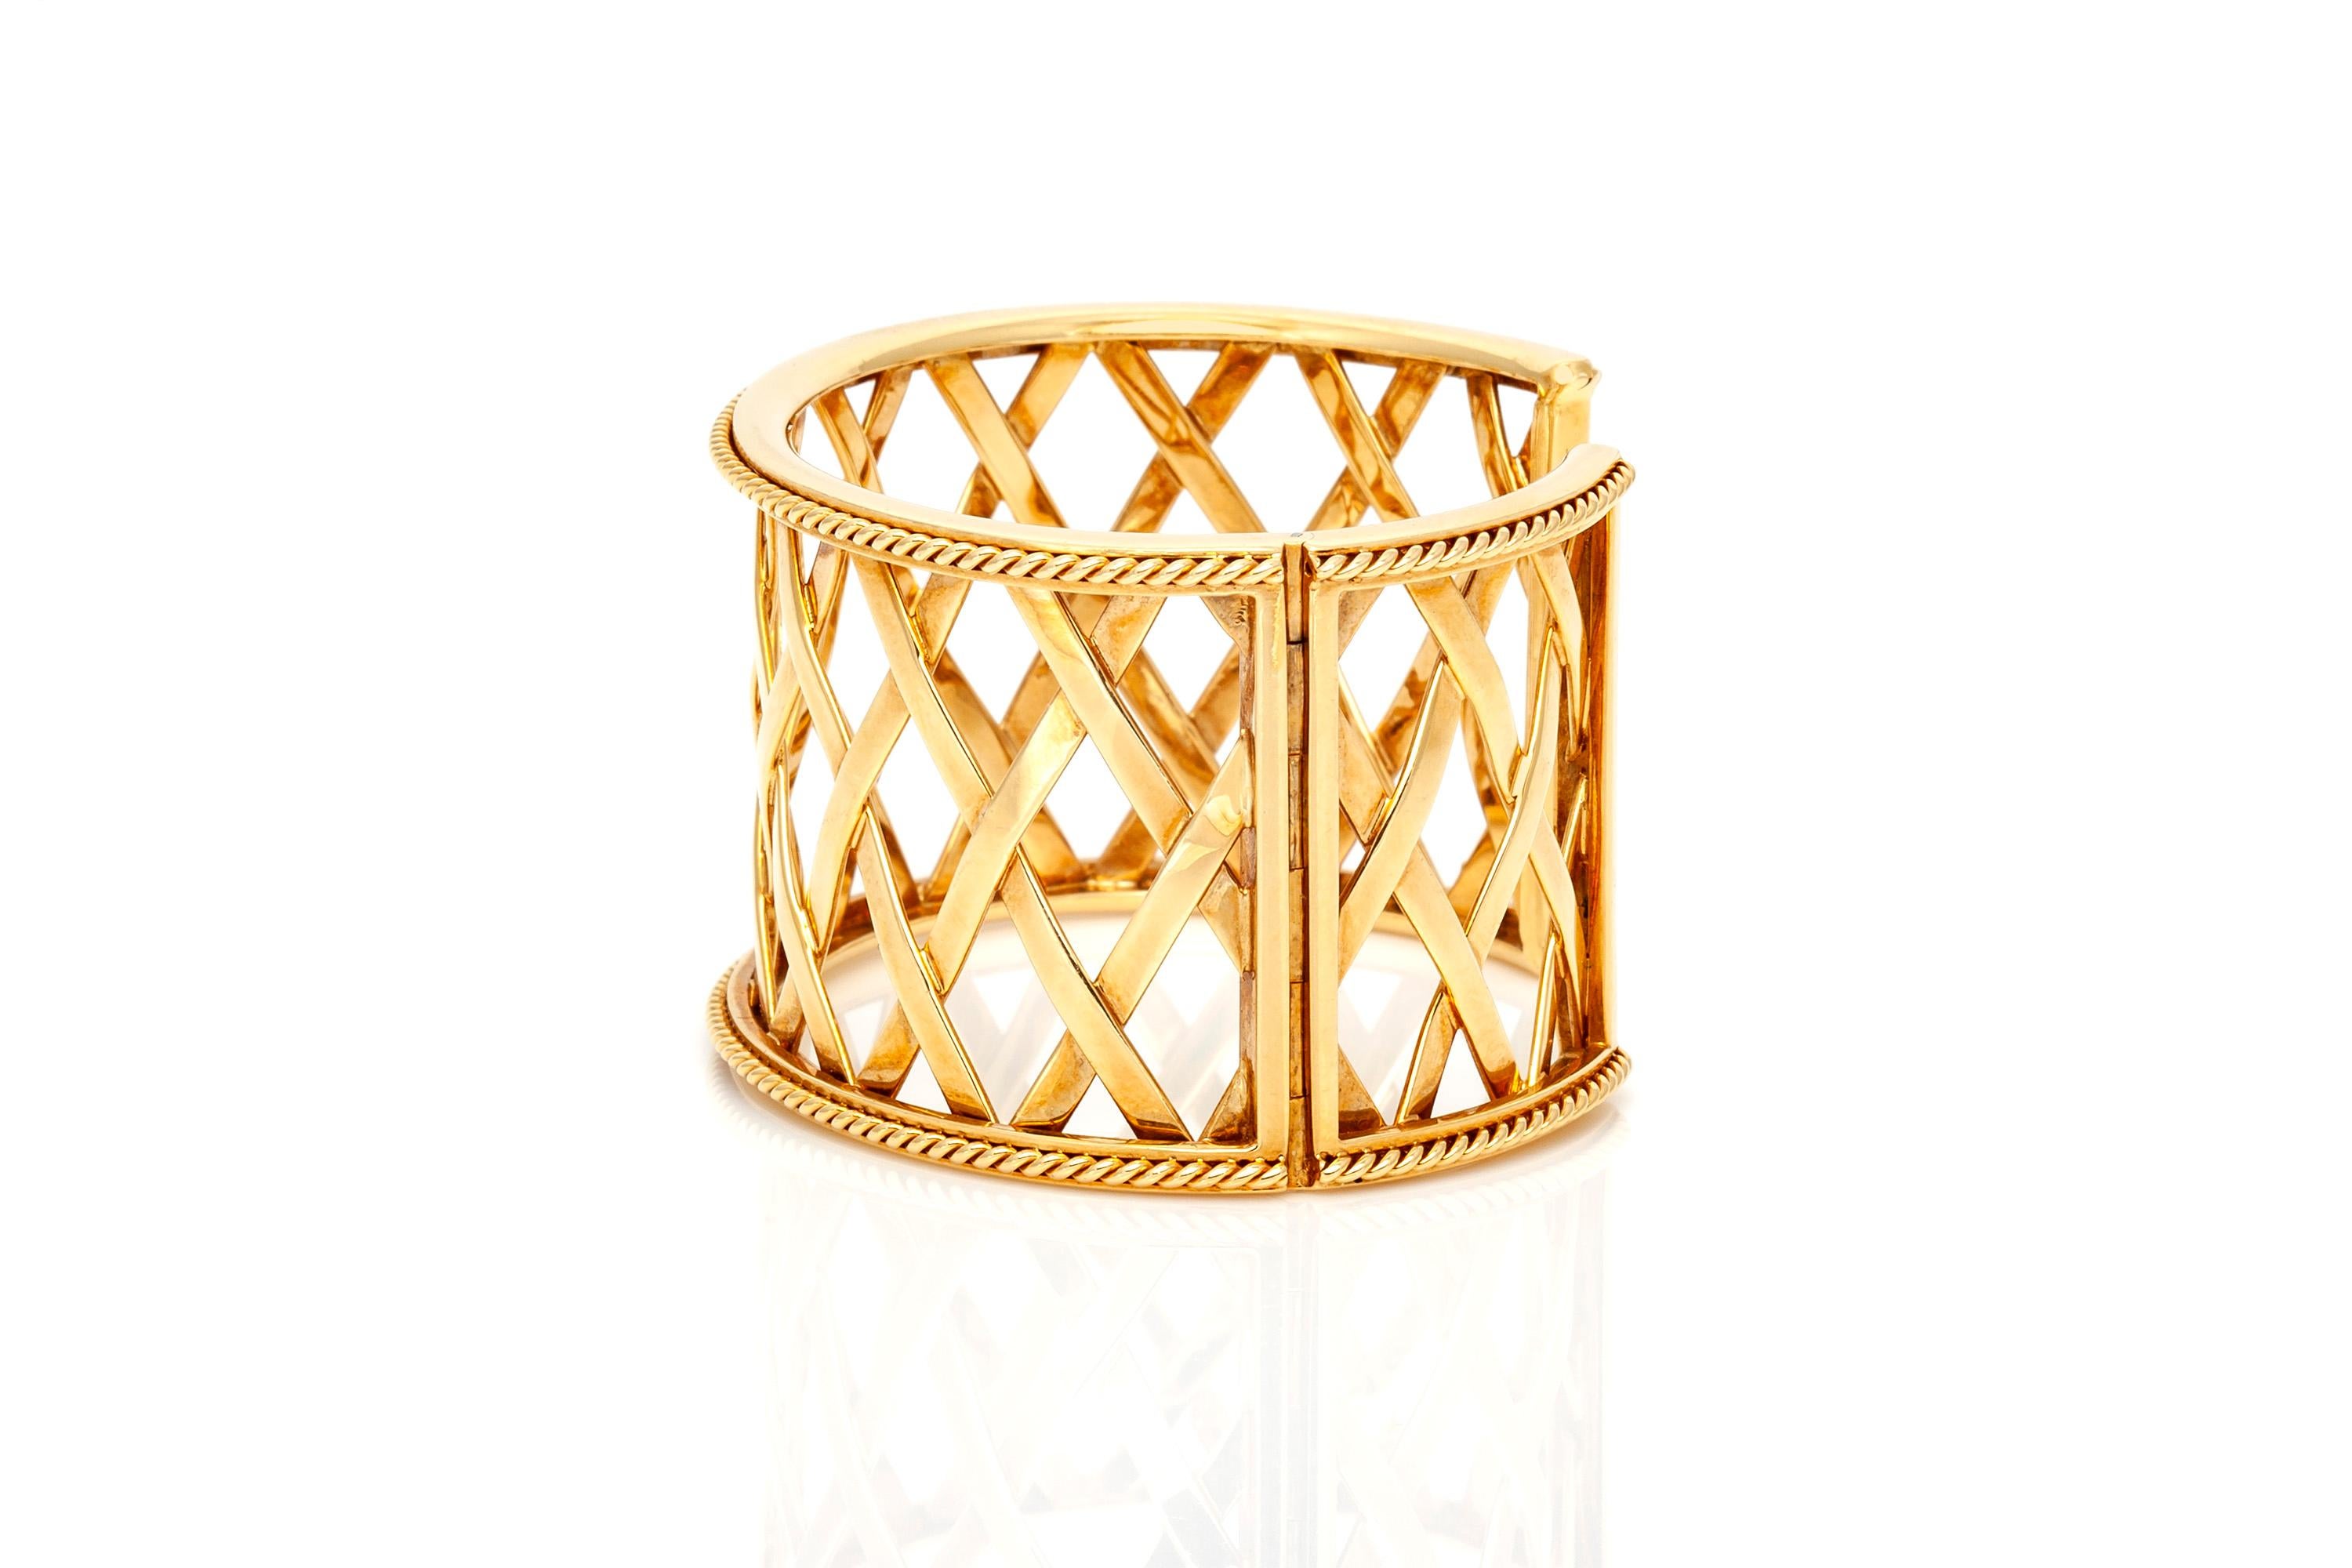 Signed by Christina Addison, 18k yellow gold Woven cuff with twisted rope border and hinged opening.